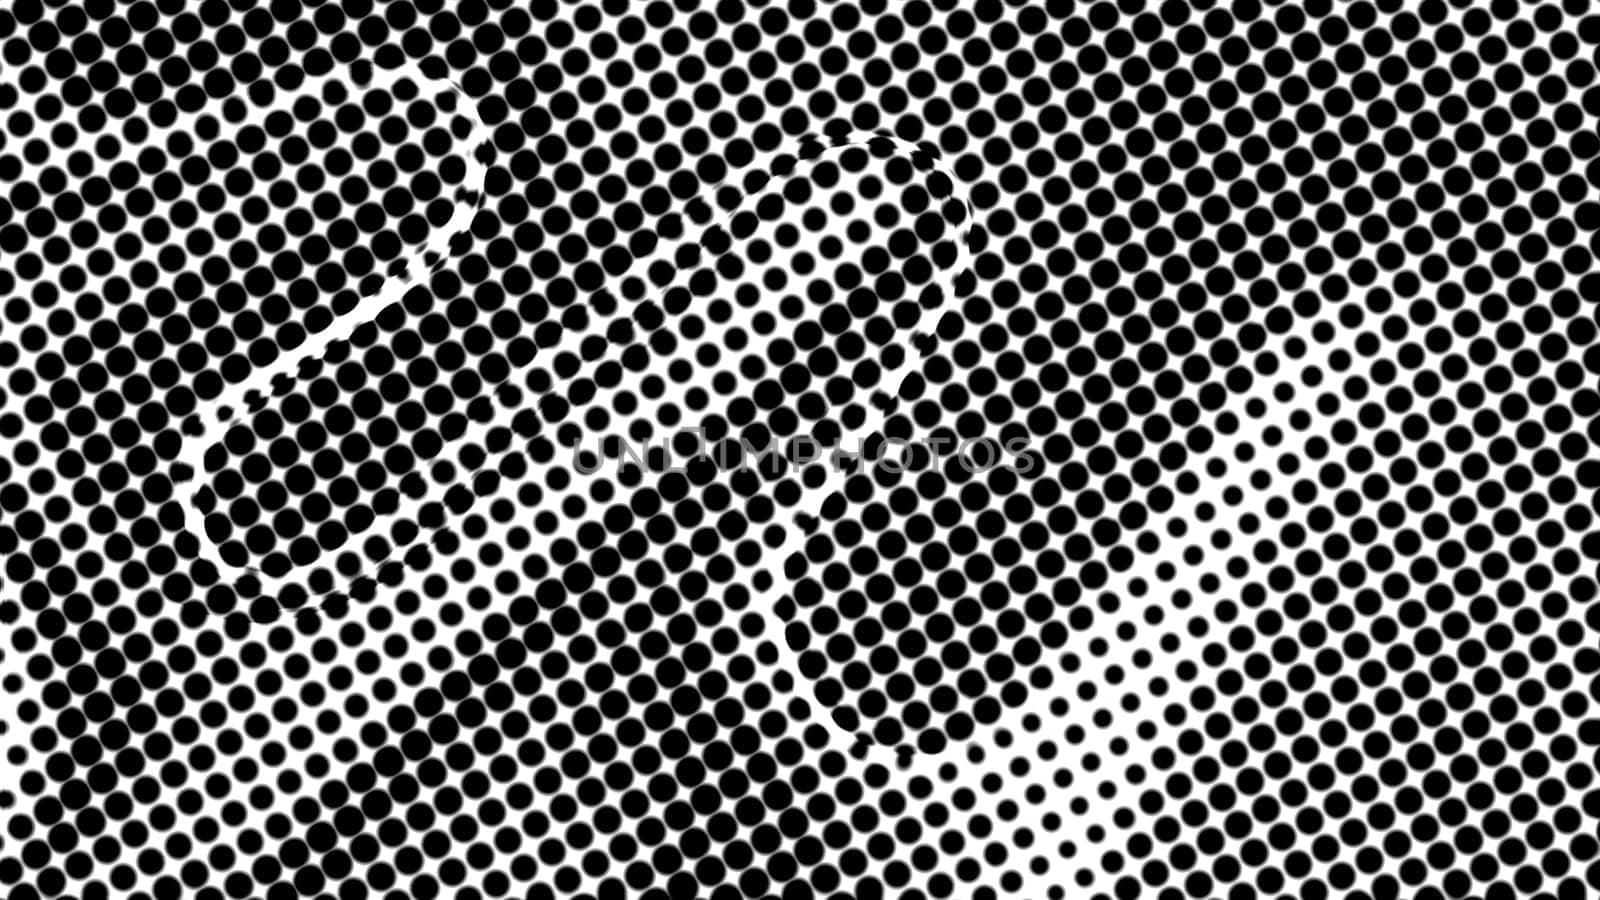 Black and white halftone. Computer generated 3d render